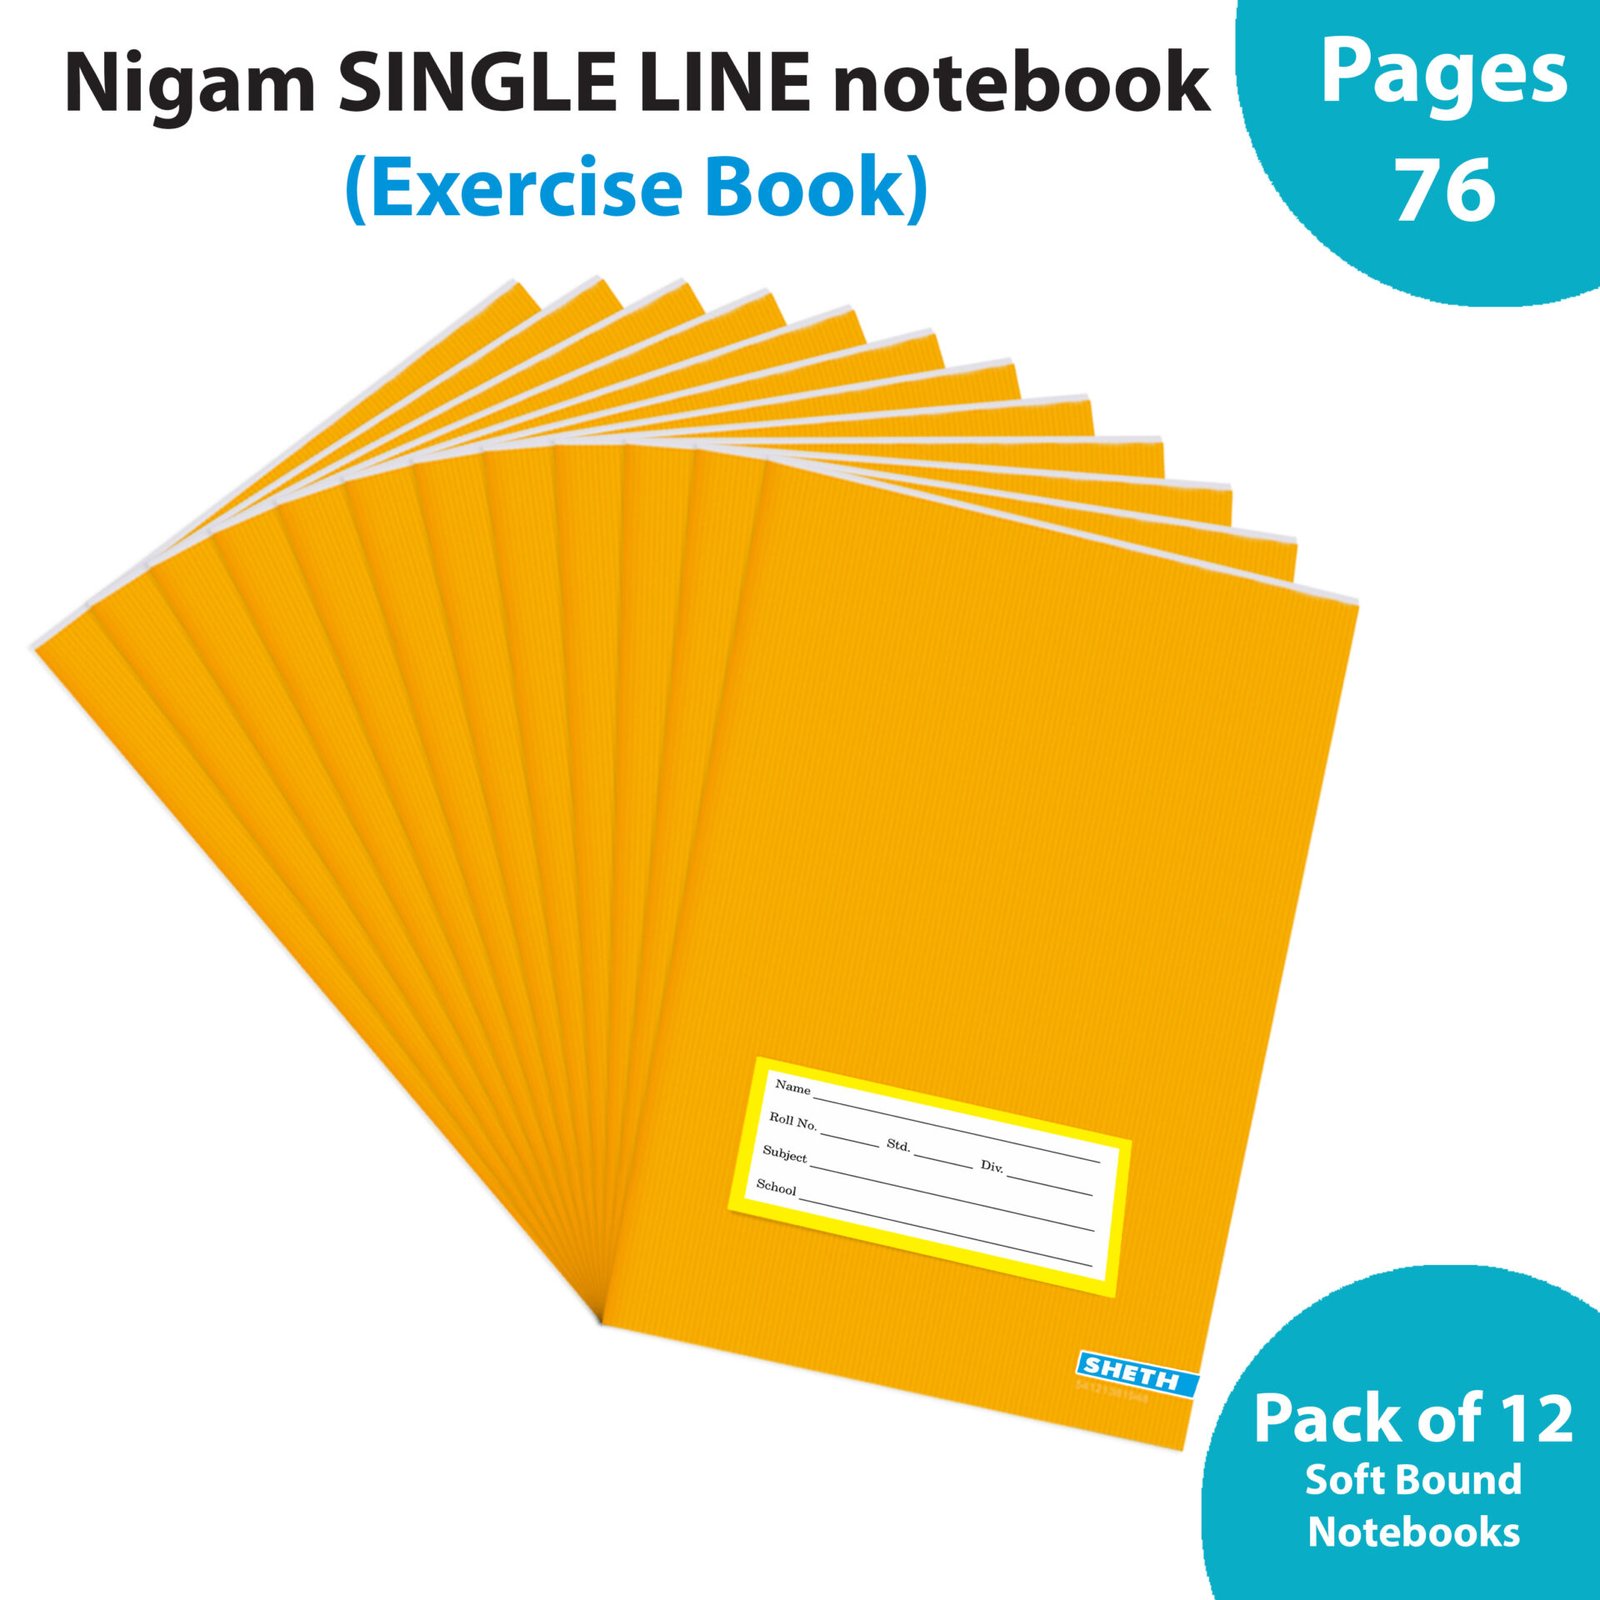 Nigam Single Line Long Note Book 76 Pages Soft Bound Set of 12 1